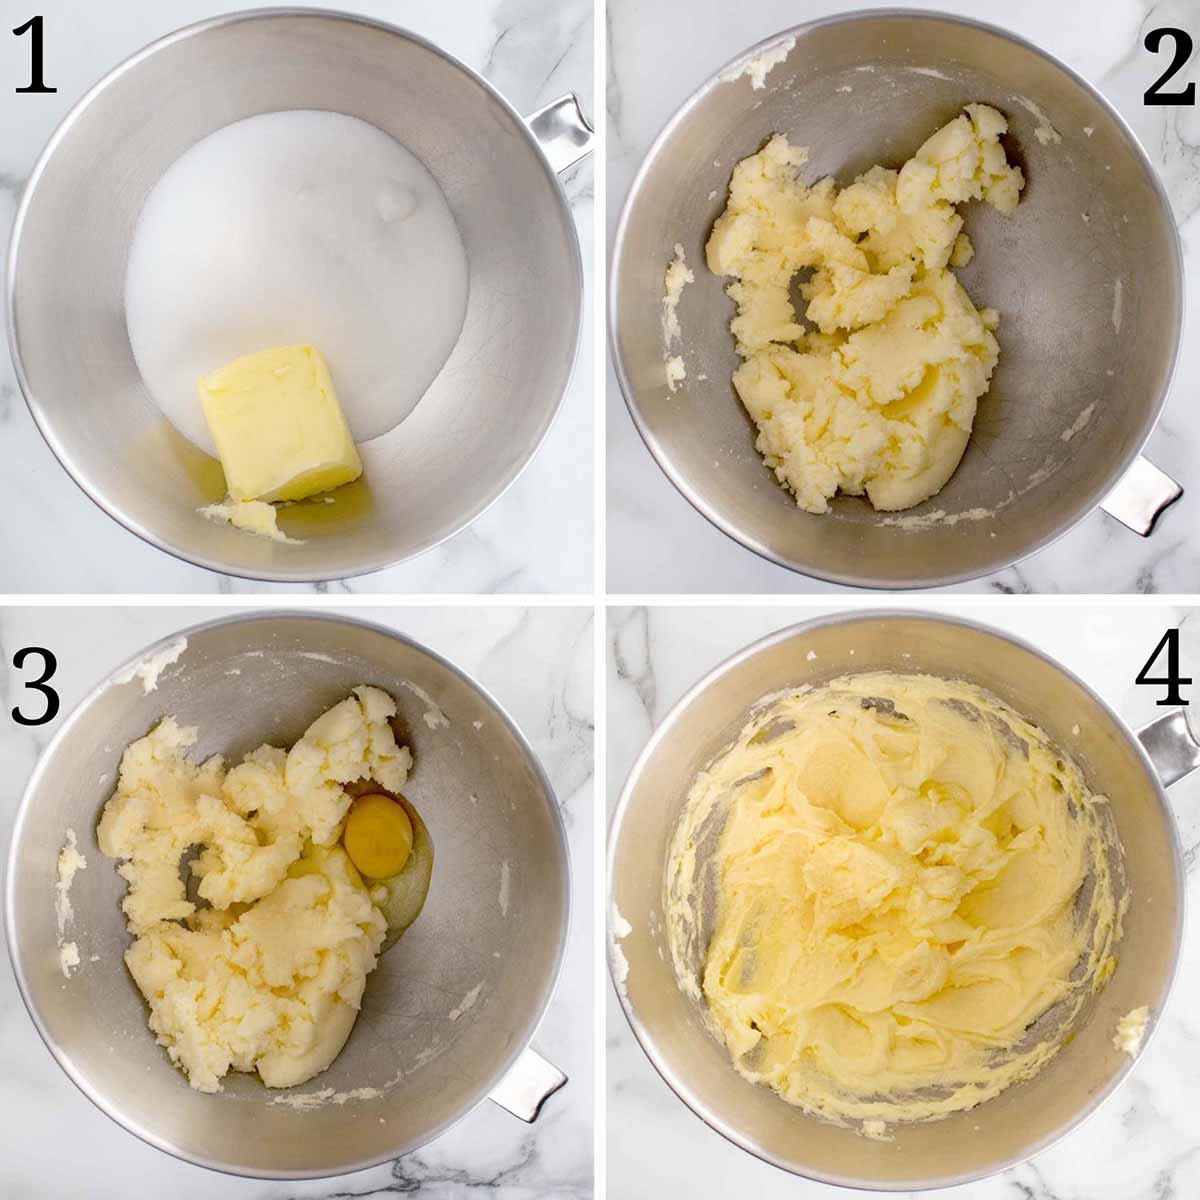 the first four images showing how to make the yellow cake